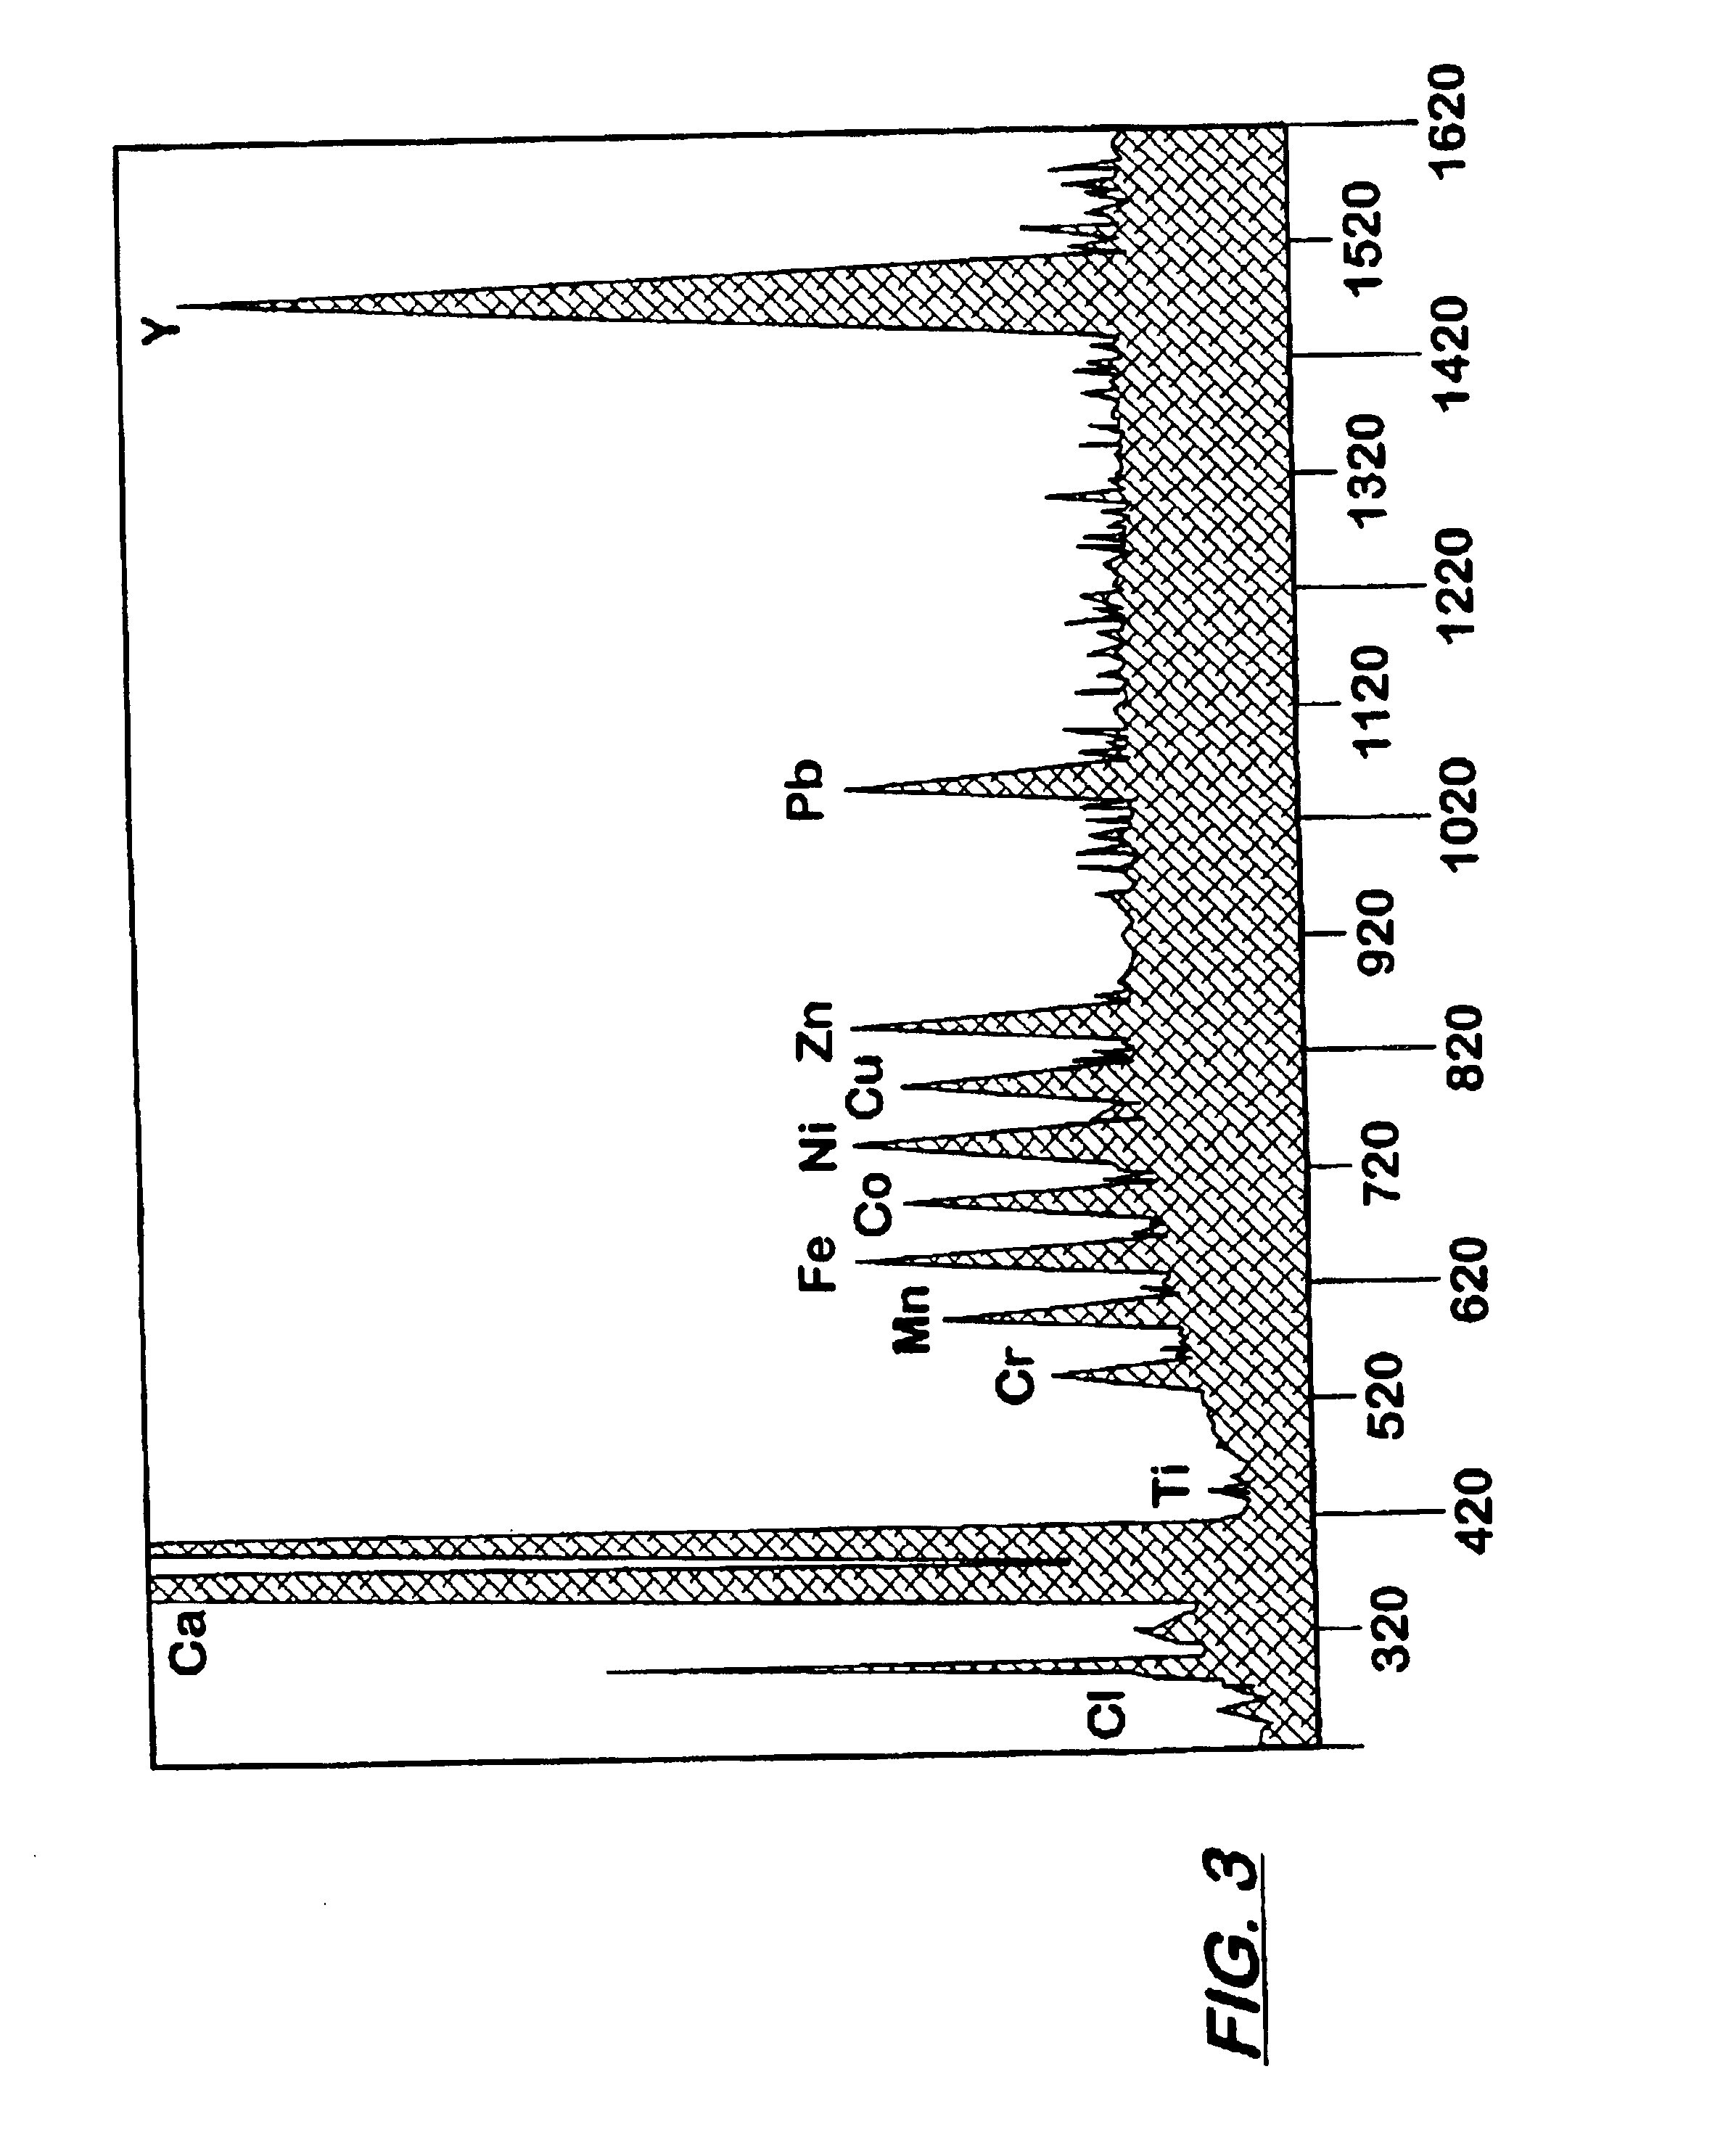 Methods for identification and verification using vacuum XRF system